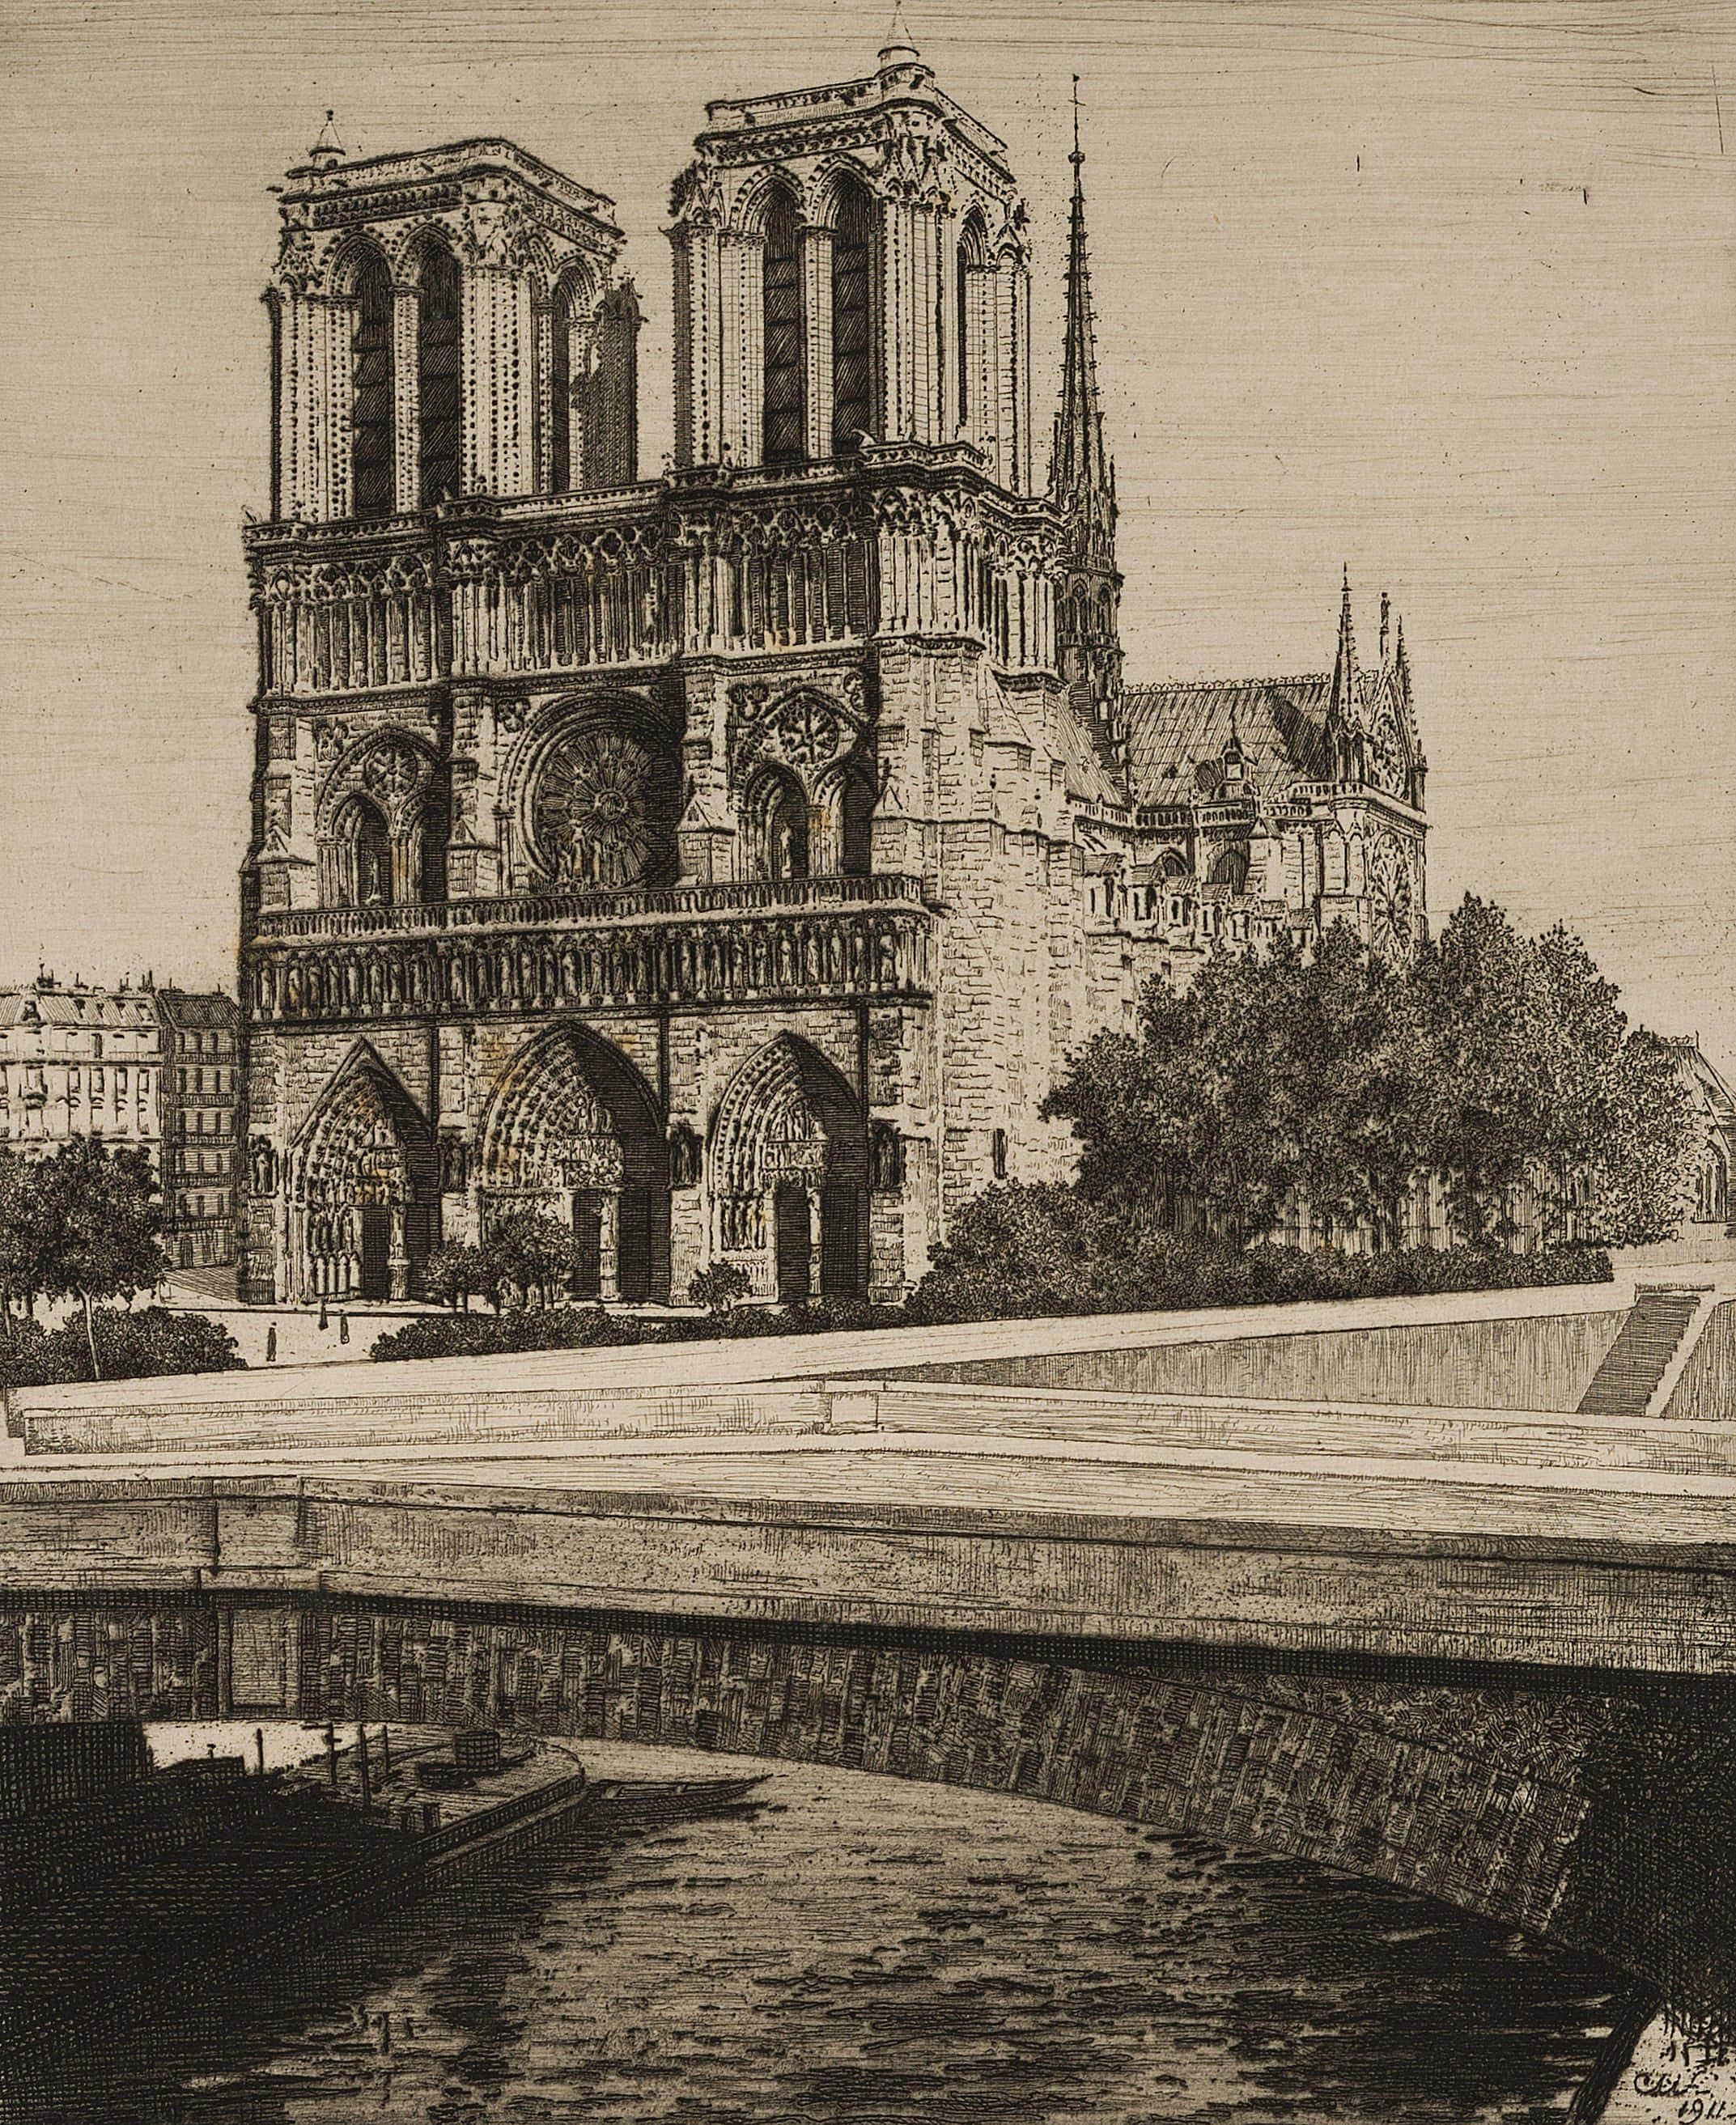 Carl August Walther (1880 Leipzig - 1956 Dresden): Notre Dame de Paris with Seine and Bridge, 1911, Etching

Technique: Etching on Paper

Stamp: Lower right Estate stamp, Carl Walther. Dresden. 20th century

Inscription: Lower right signed: